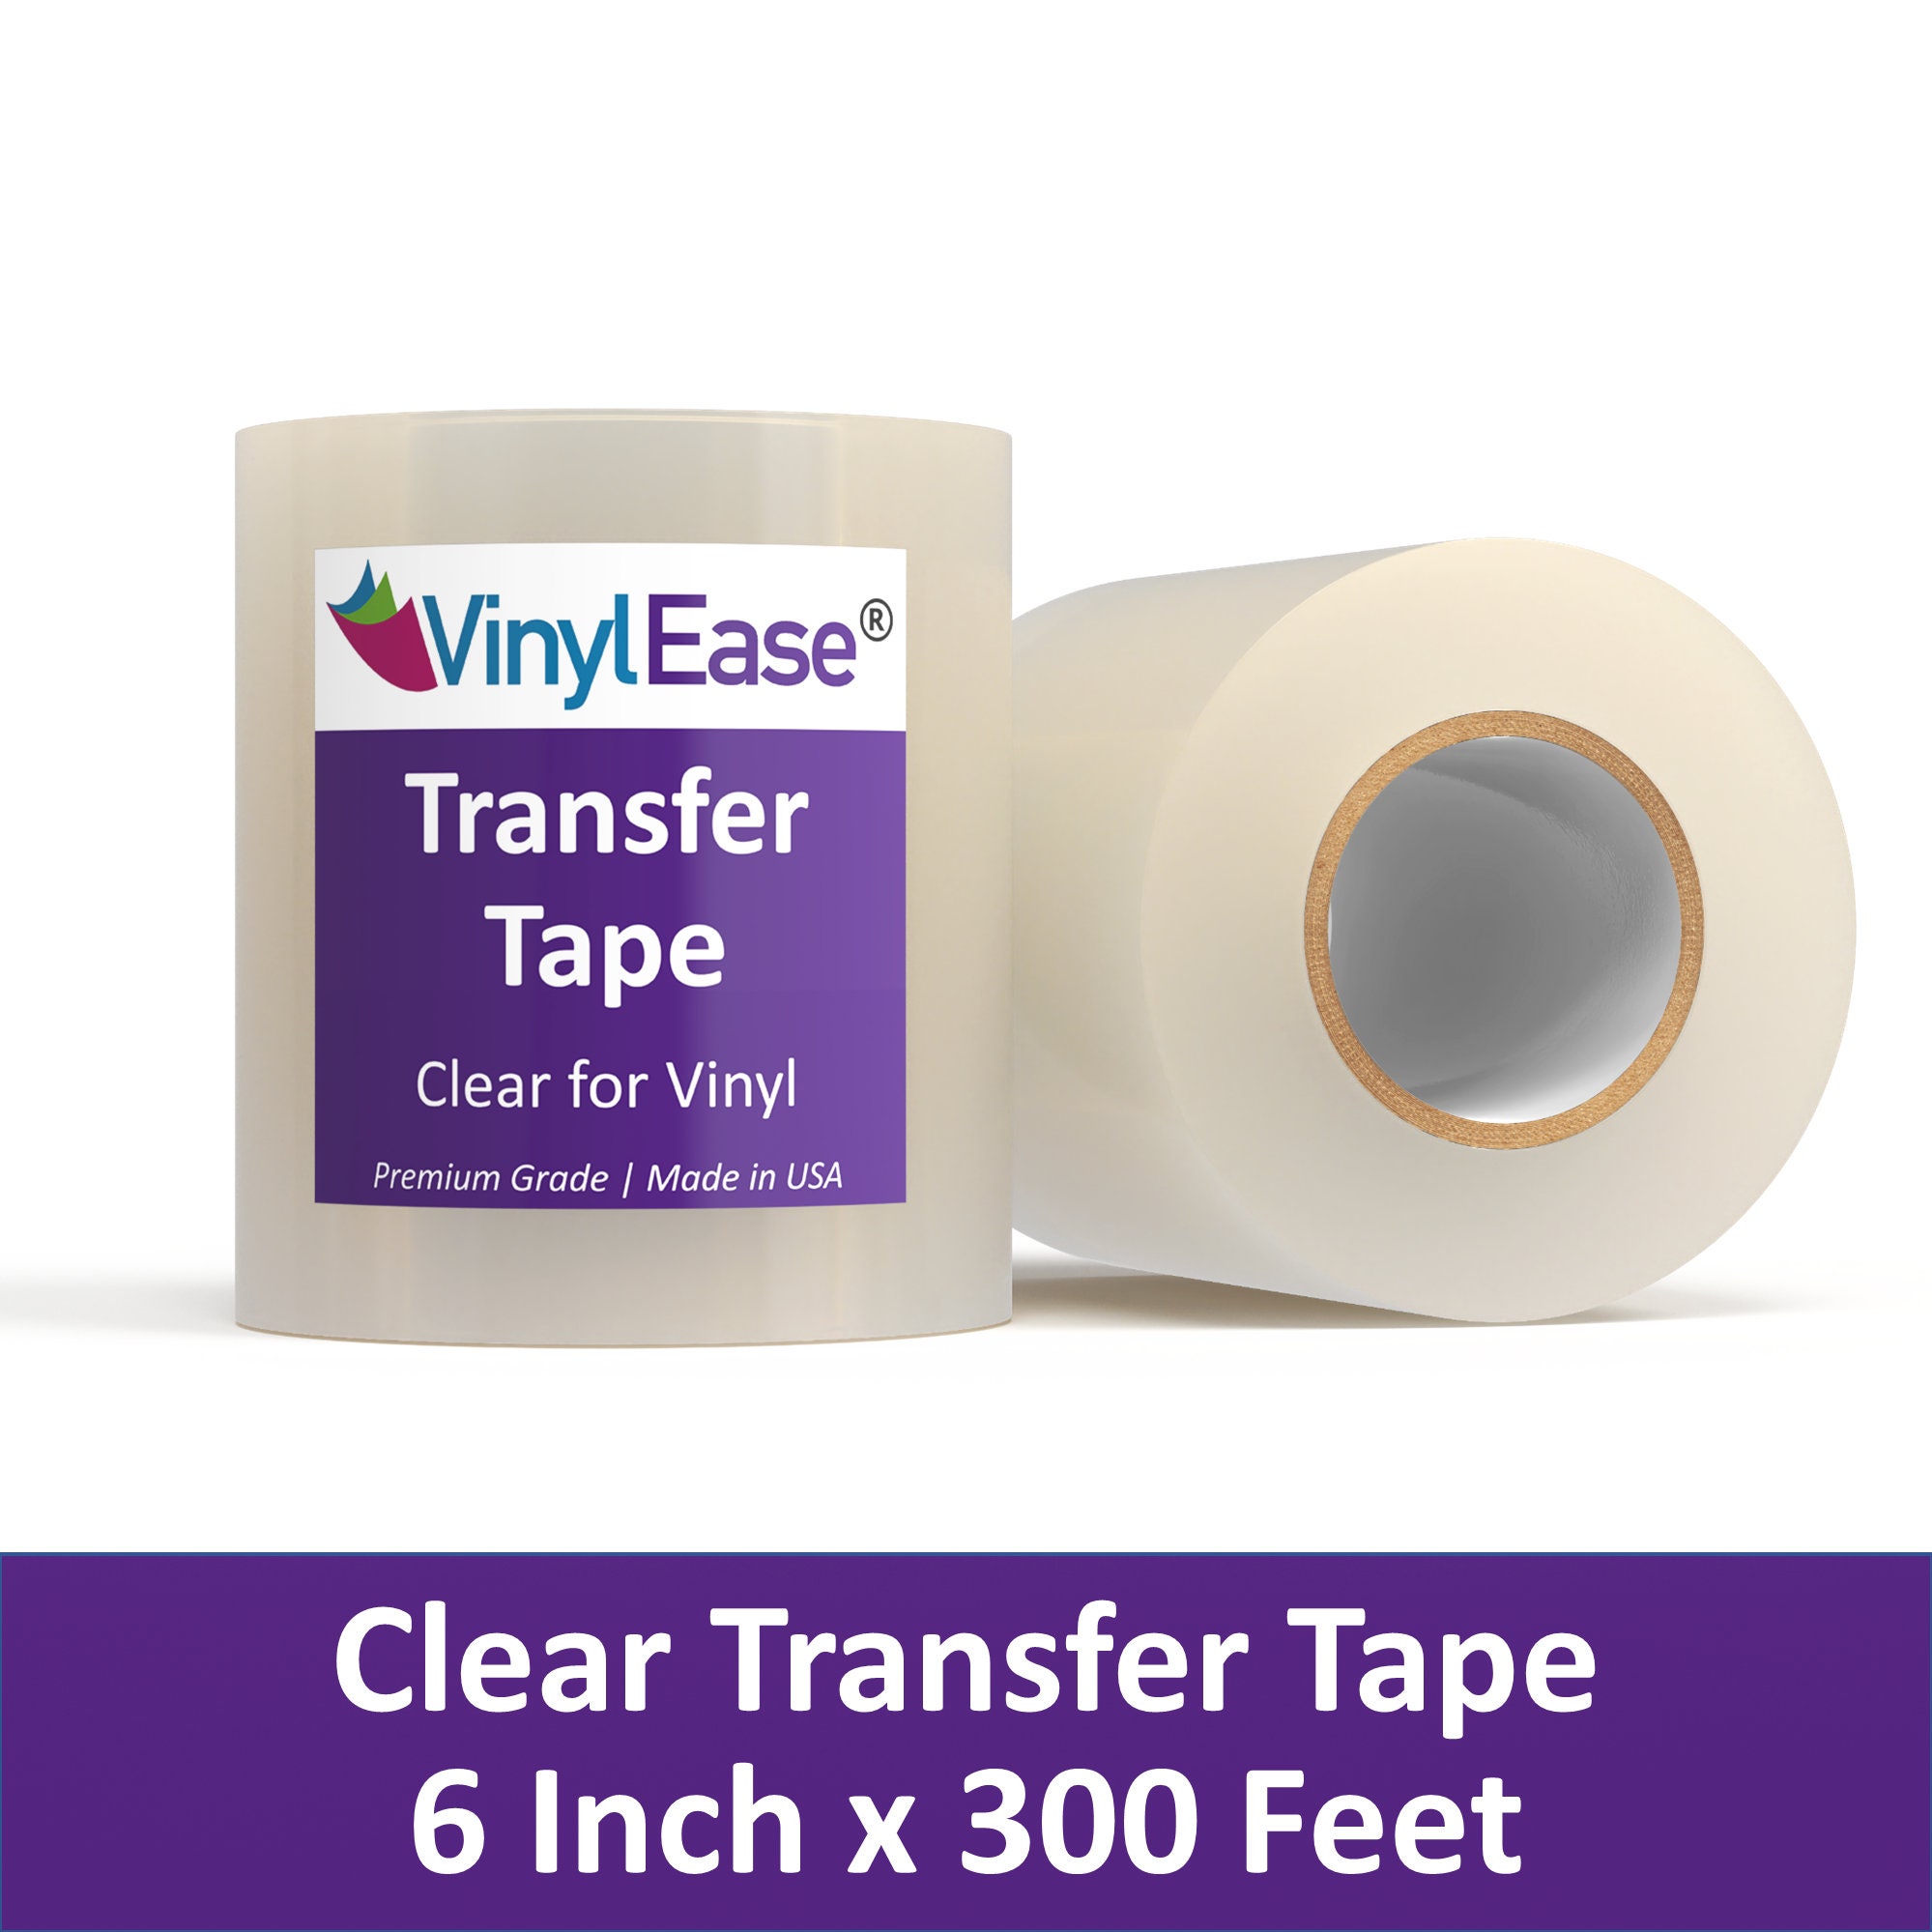  12 x 300' Roll of Clear, High Tack Vinyl Transfer